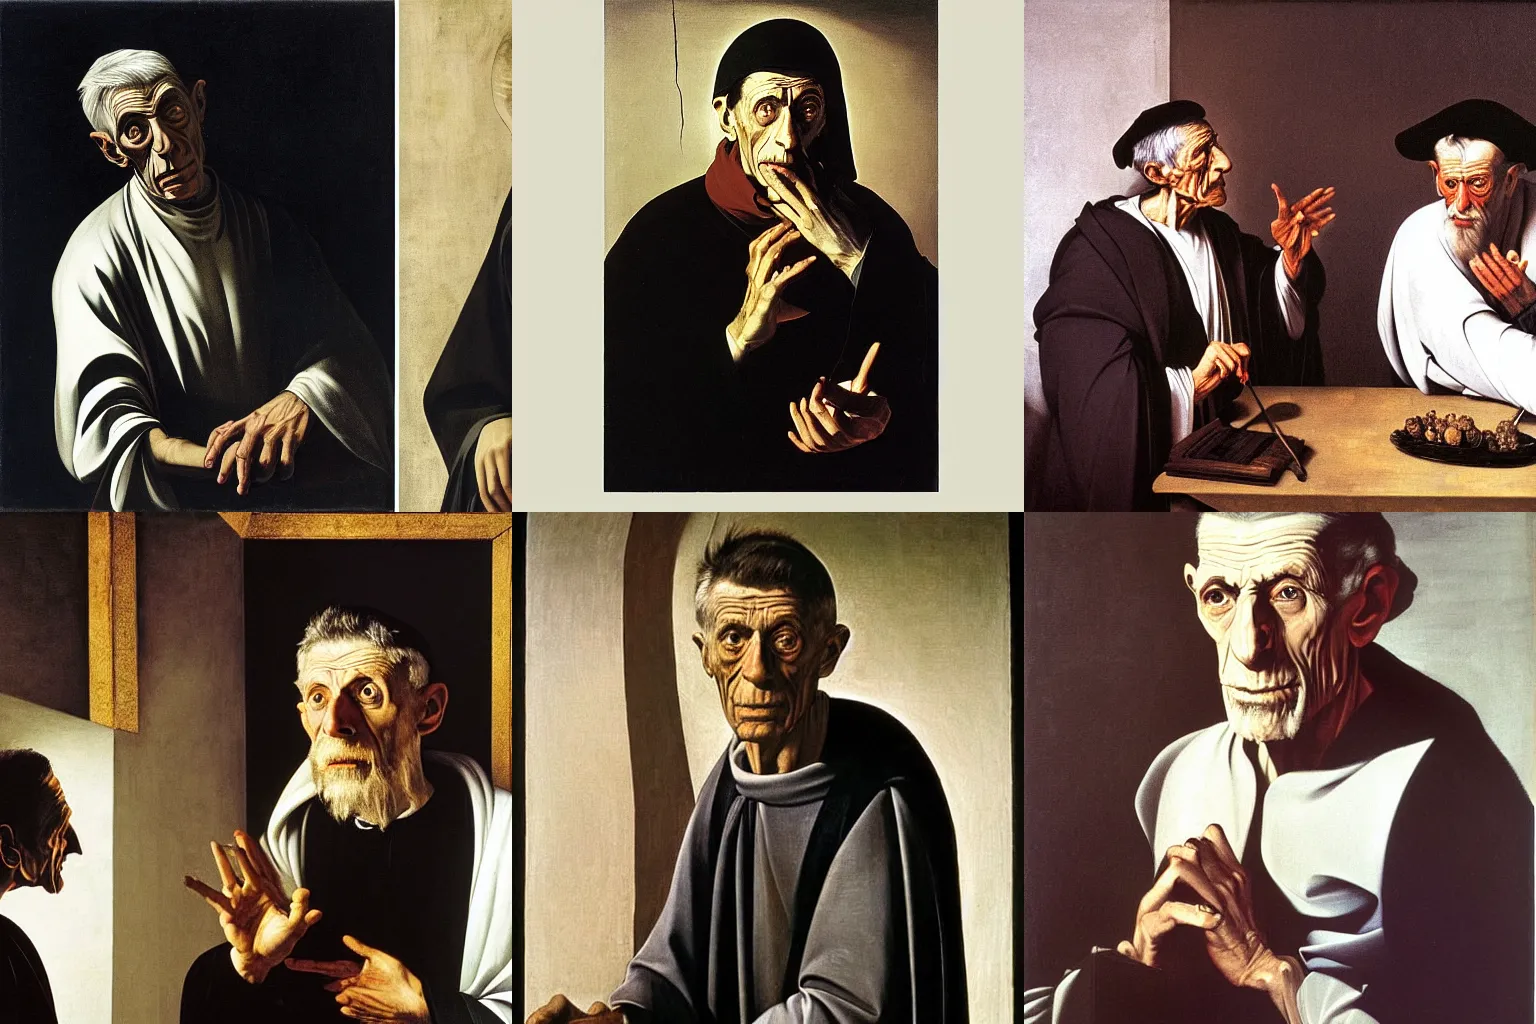 Prompt: painting by Caravaggio showing portrait of Samuel Beckett as holy man